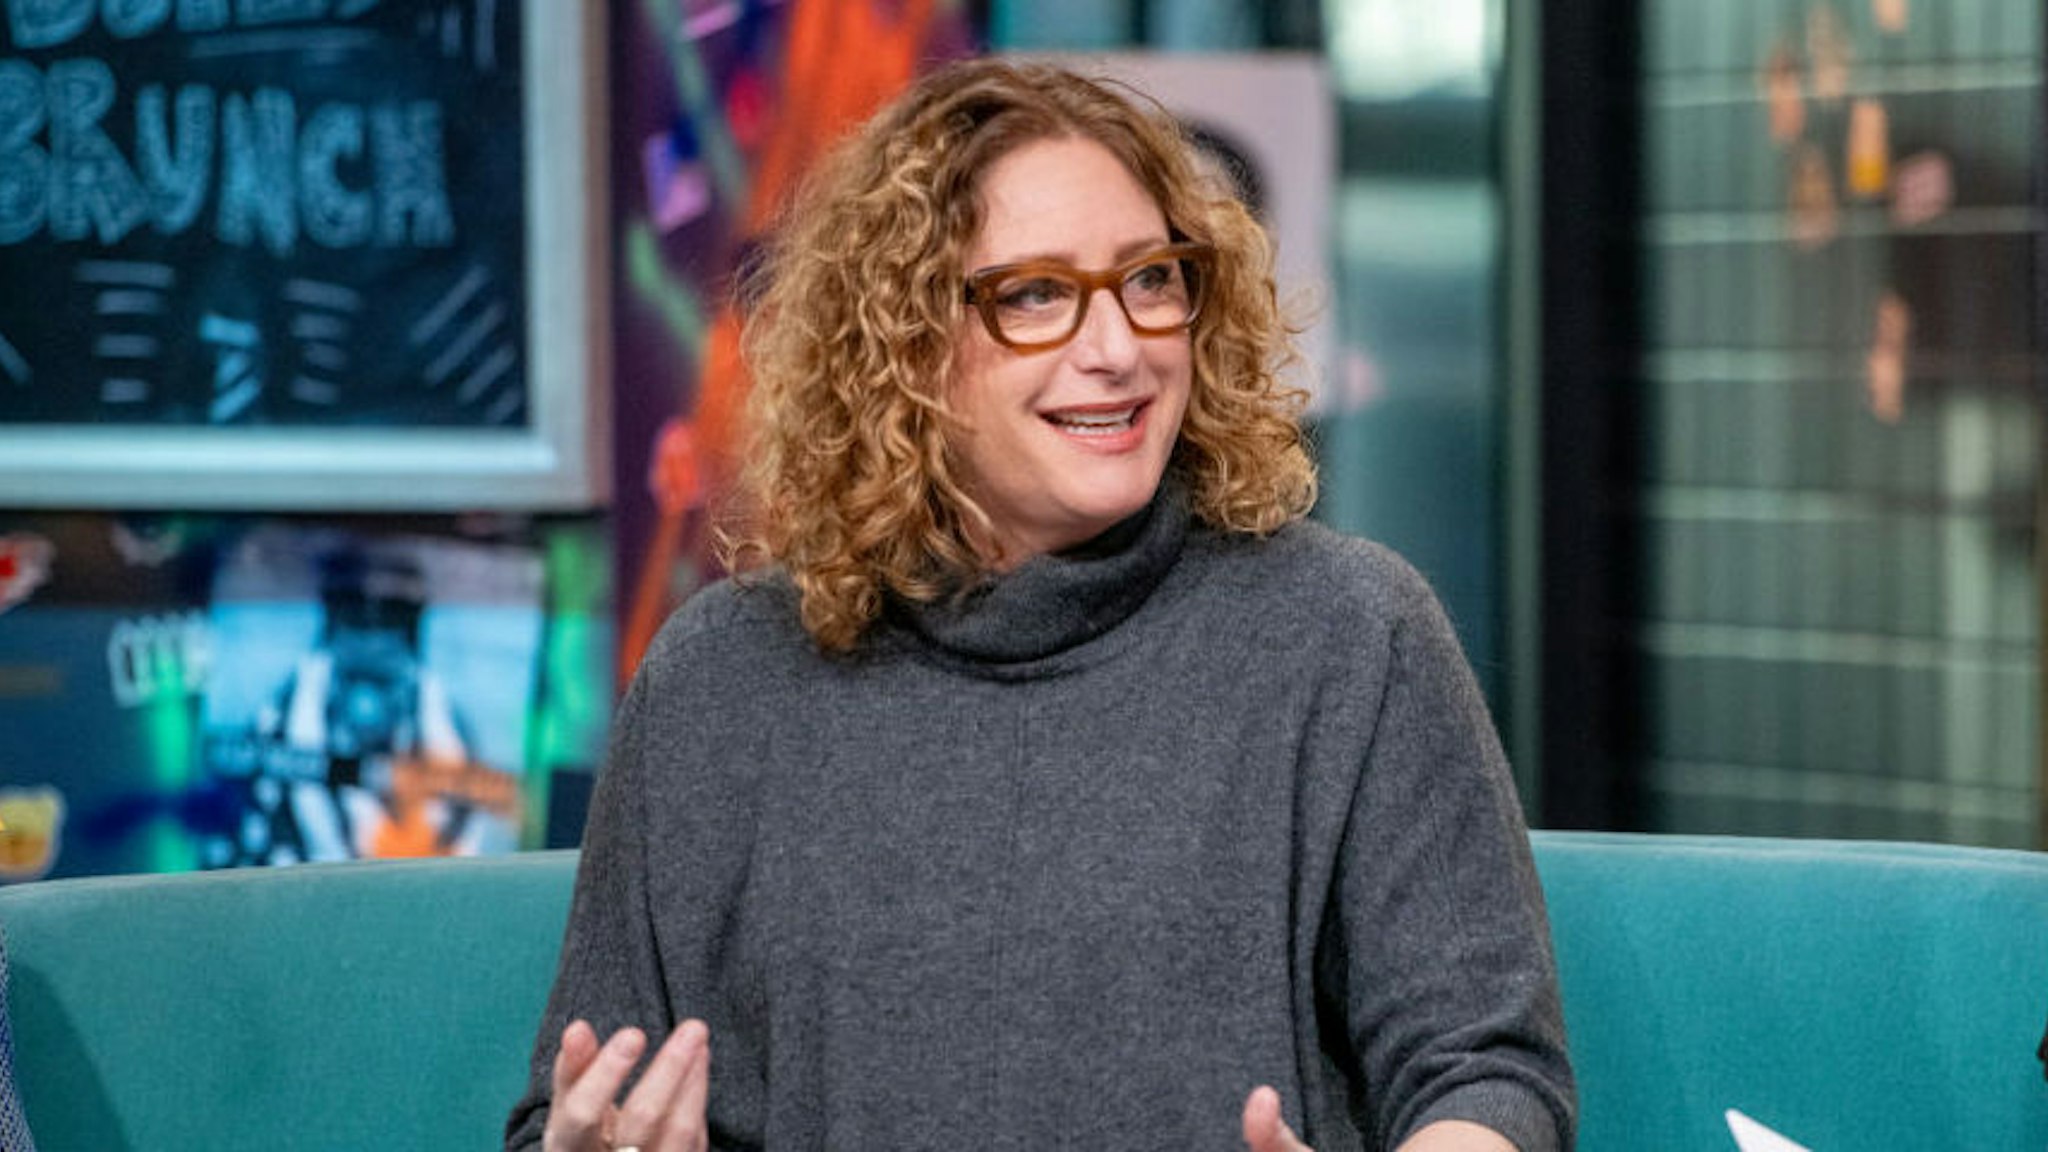 Comedian Judy Gold discusses her podcast and album 'Kill Me Now' with Build Brunch at Build Studio on January 07, 2019 in New York City. (Photo by Roy Rochlin/Getty Images)